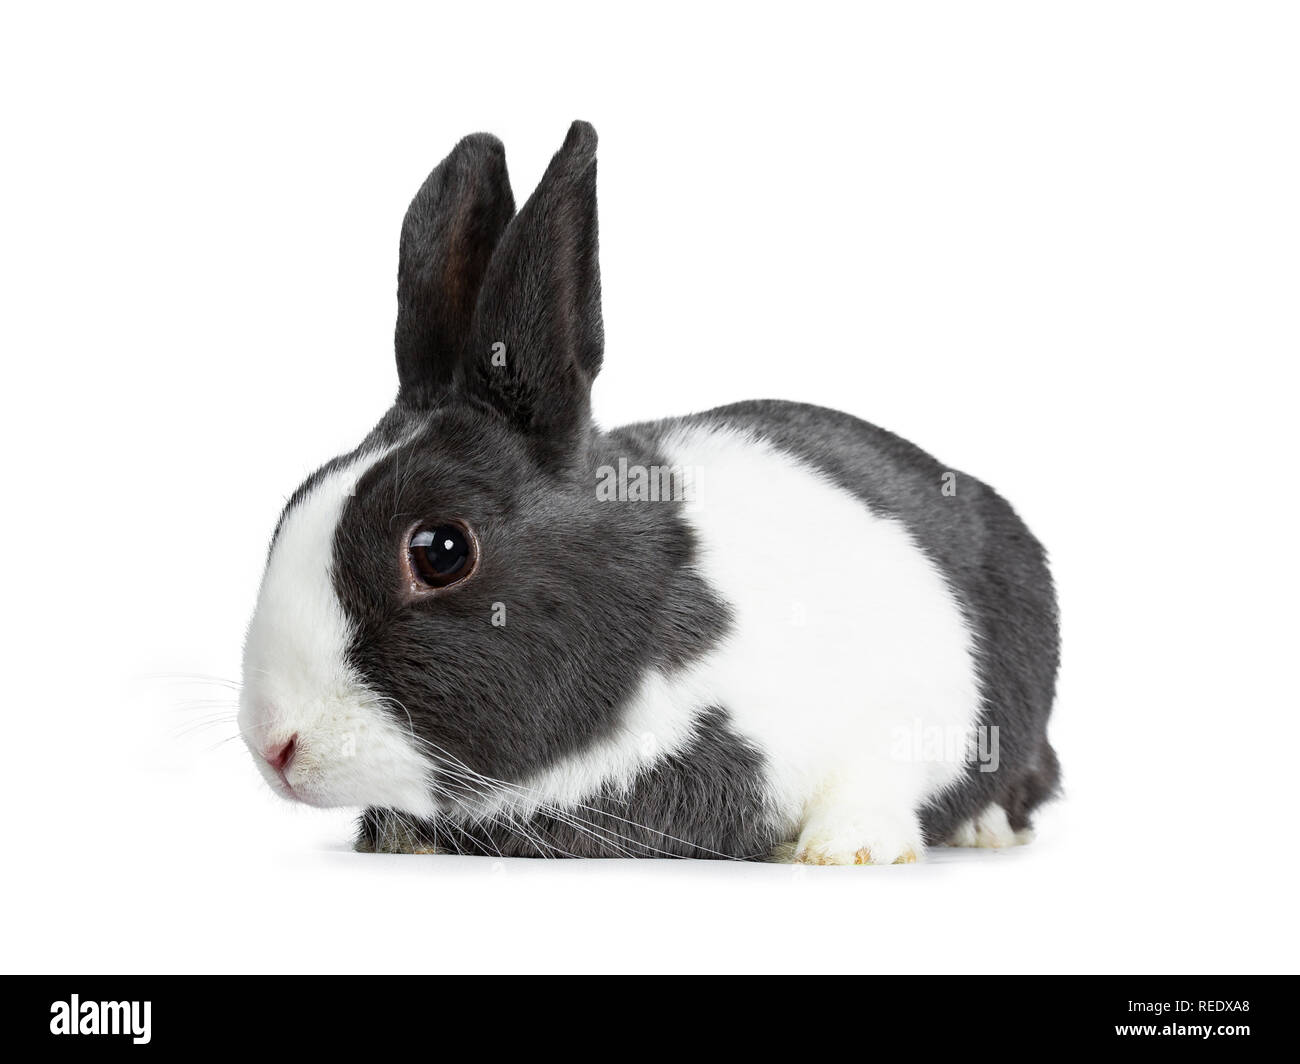 Cute female grey with white European rabbit, laying down and looking beside the camera. Isolated on white background. Stock Photo